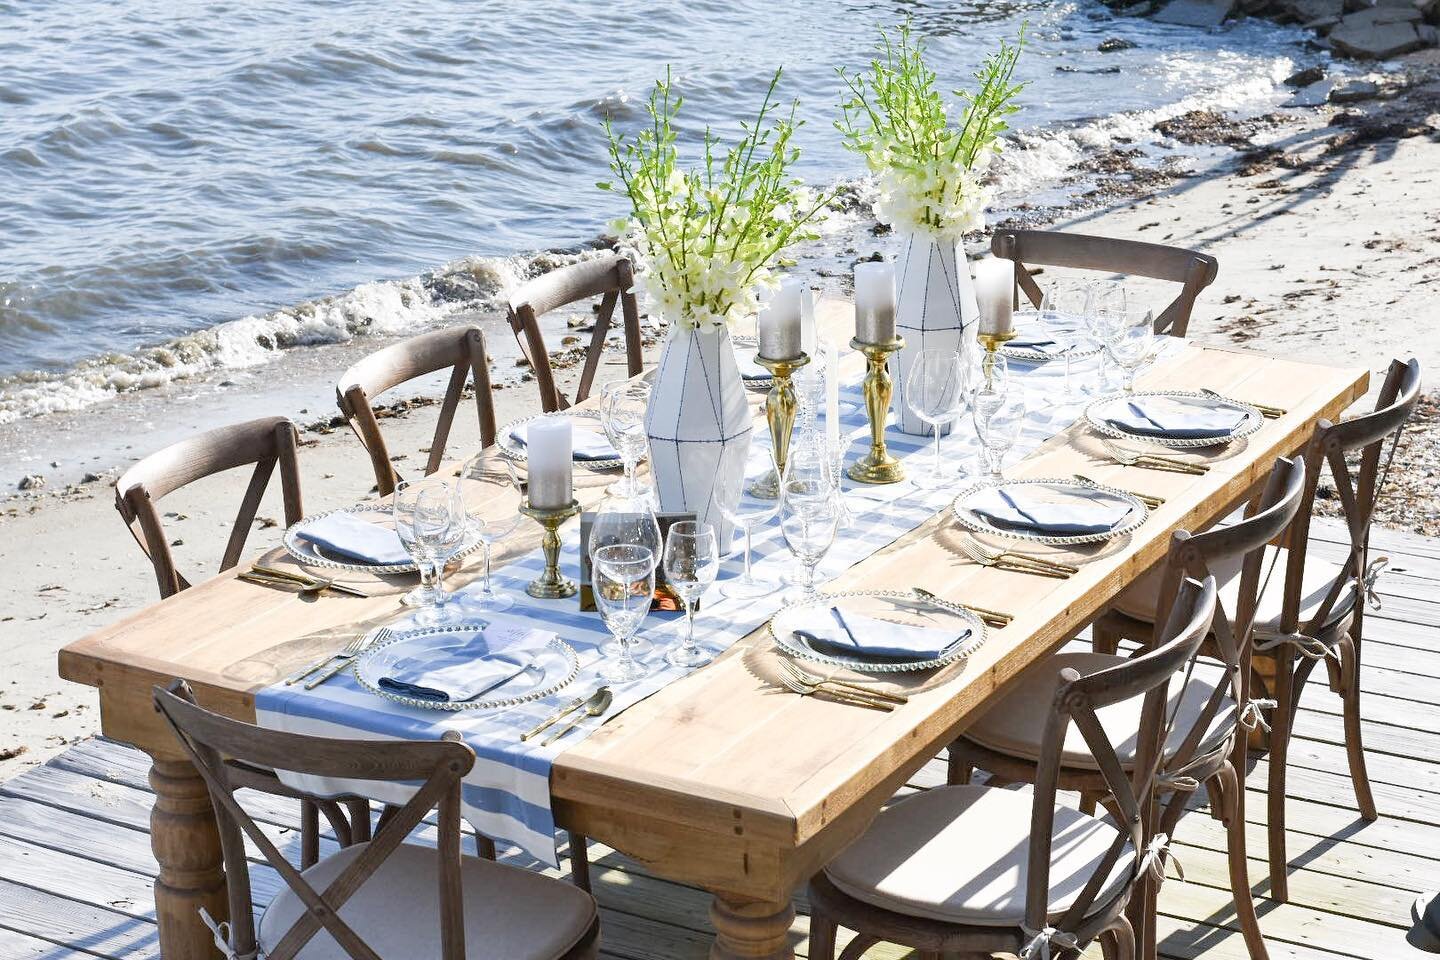 Dinner on the water anyone? Swooning over last nights dinner party setup in Morehead City! 🥂🍴